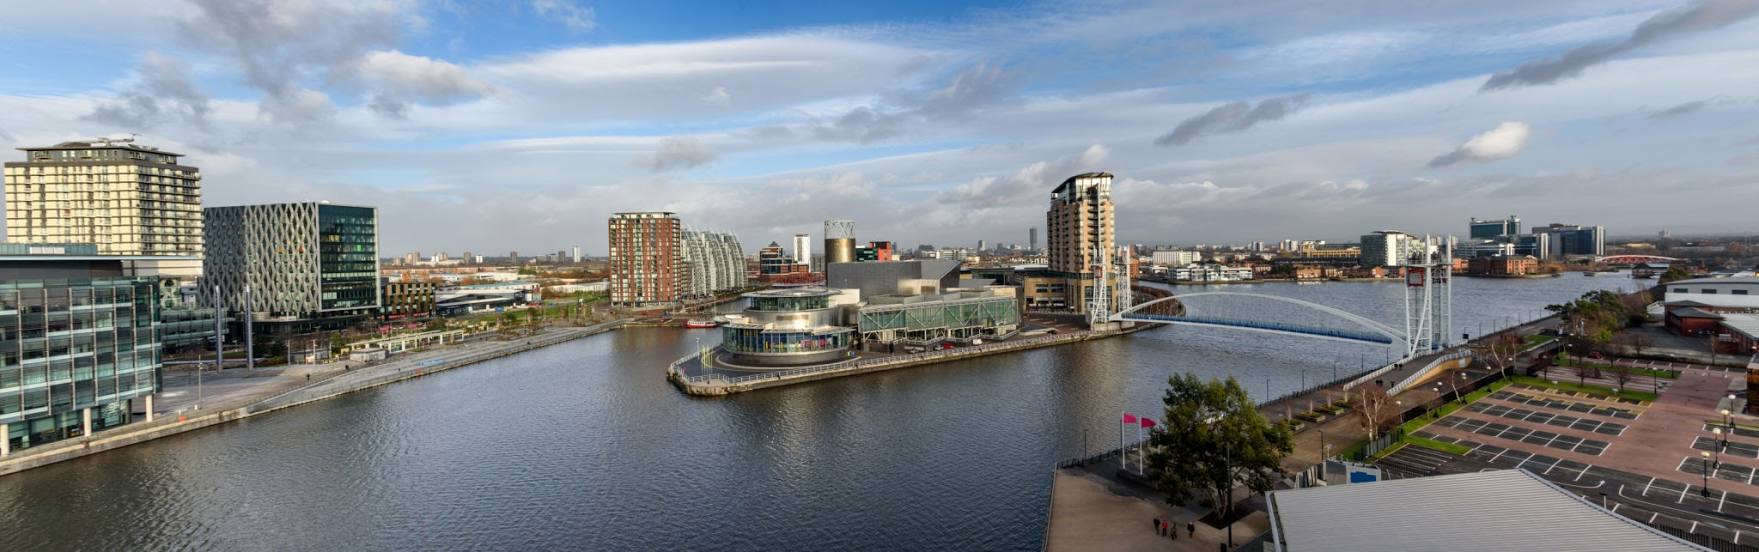 The Quays, Salford